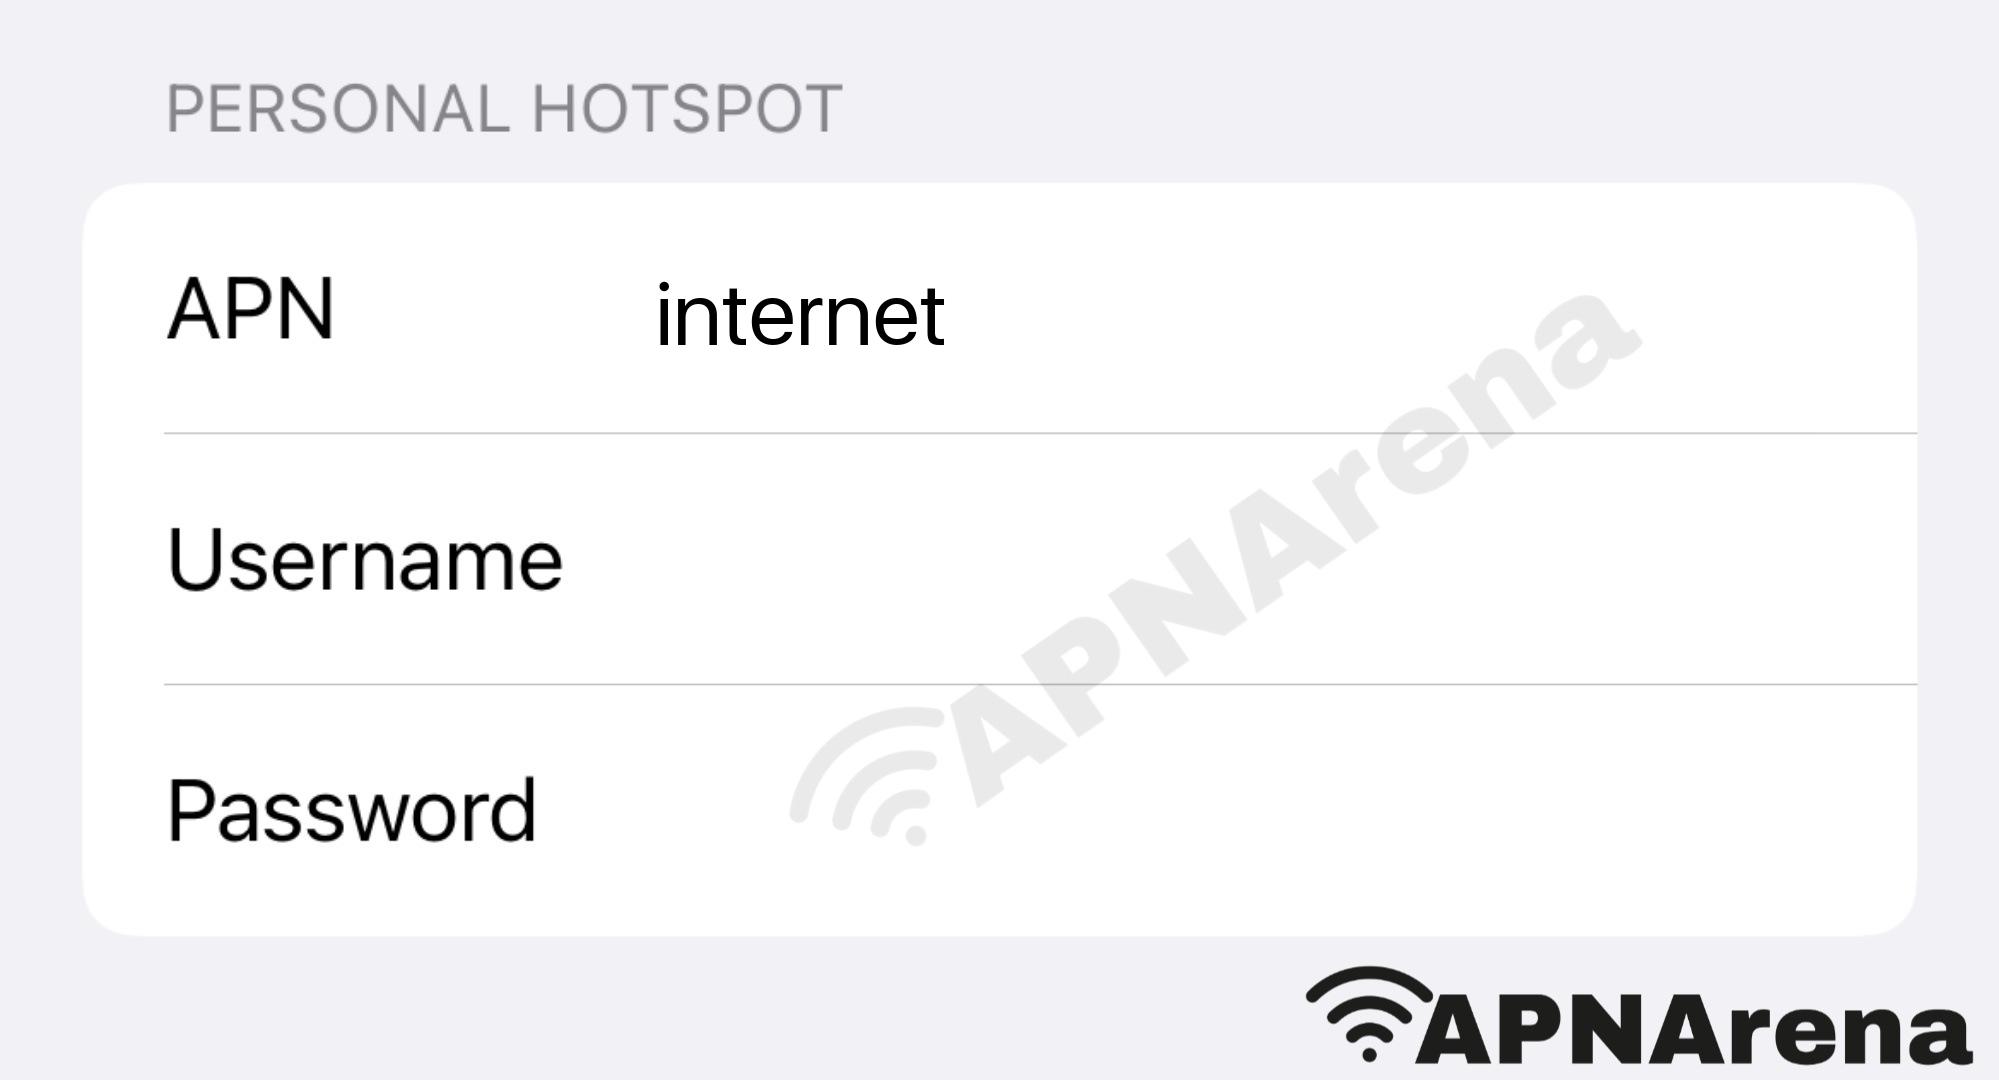 mts Serbia Personal Hotspot Settings for iPhone